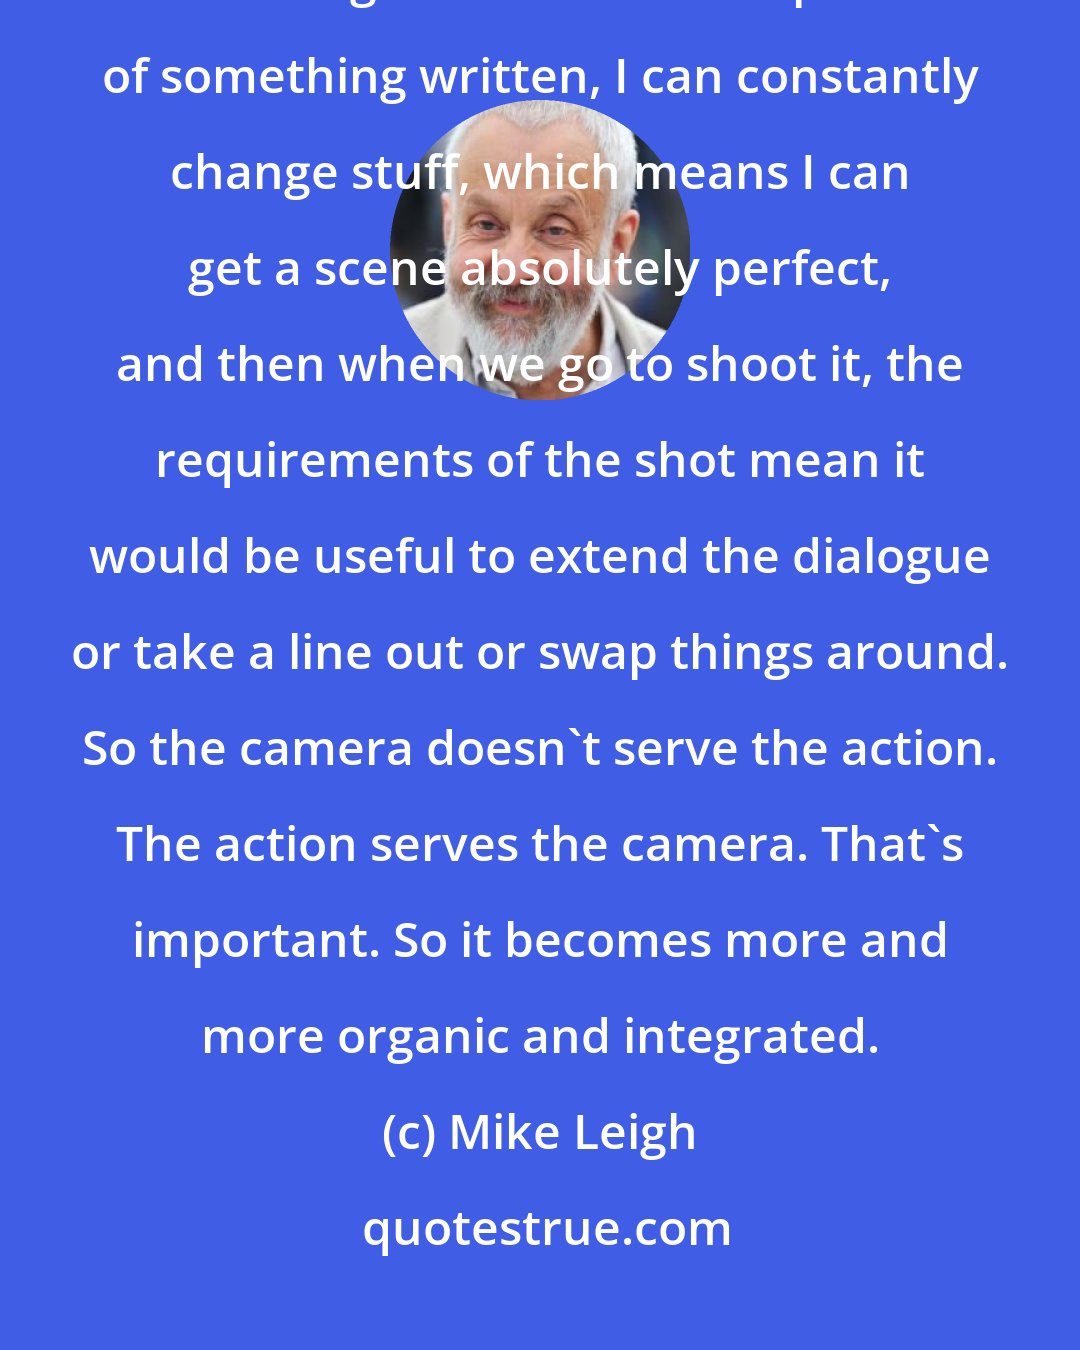 Mike Leigh: Because of the way that I work with the actors and because a scene is not in this rigid and literal interpretation of something written, I can constantly change stuff, which means I can get a scene absolutely perfect, and then when we go to shoot it, the requirements of the shot mean it would be useful to extend the dialogue or take a line out or swap things around. So the camera doesn't serve the action. The action serves the camera. That's important. So it becomes more and more organic and integrated.